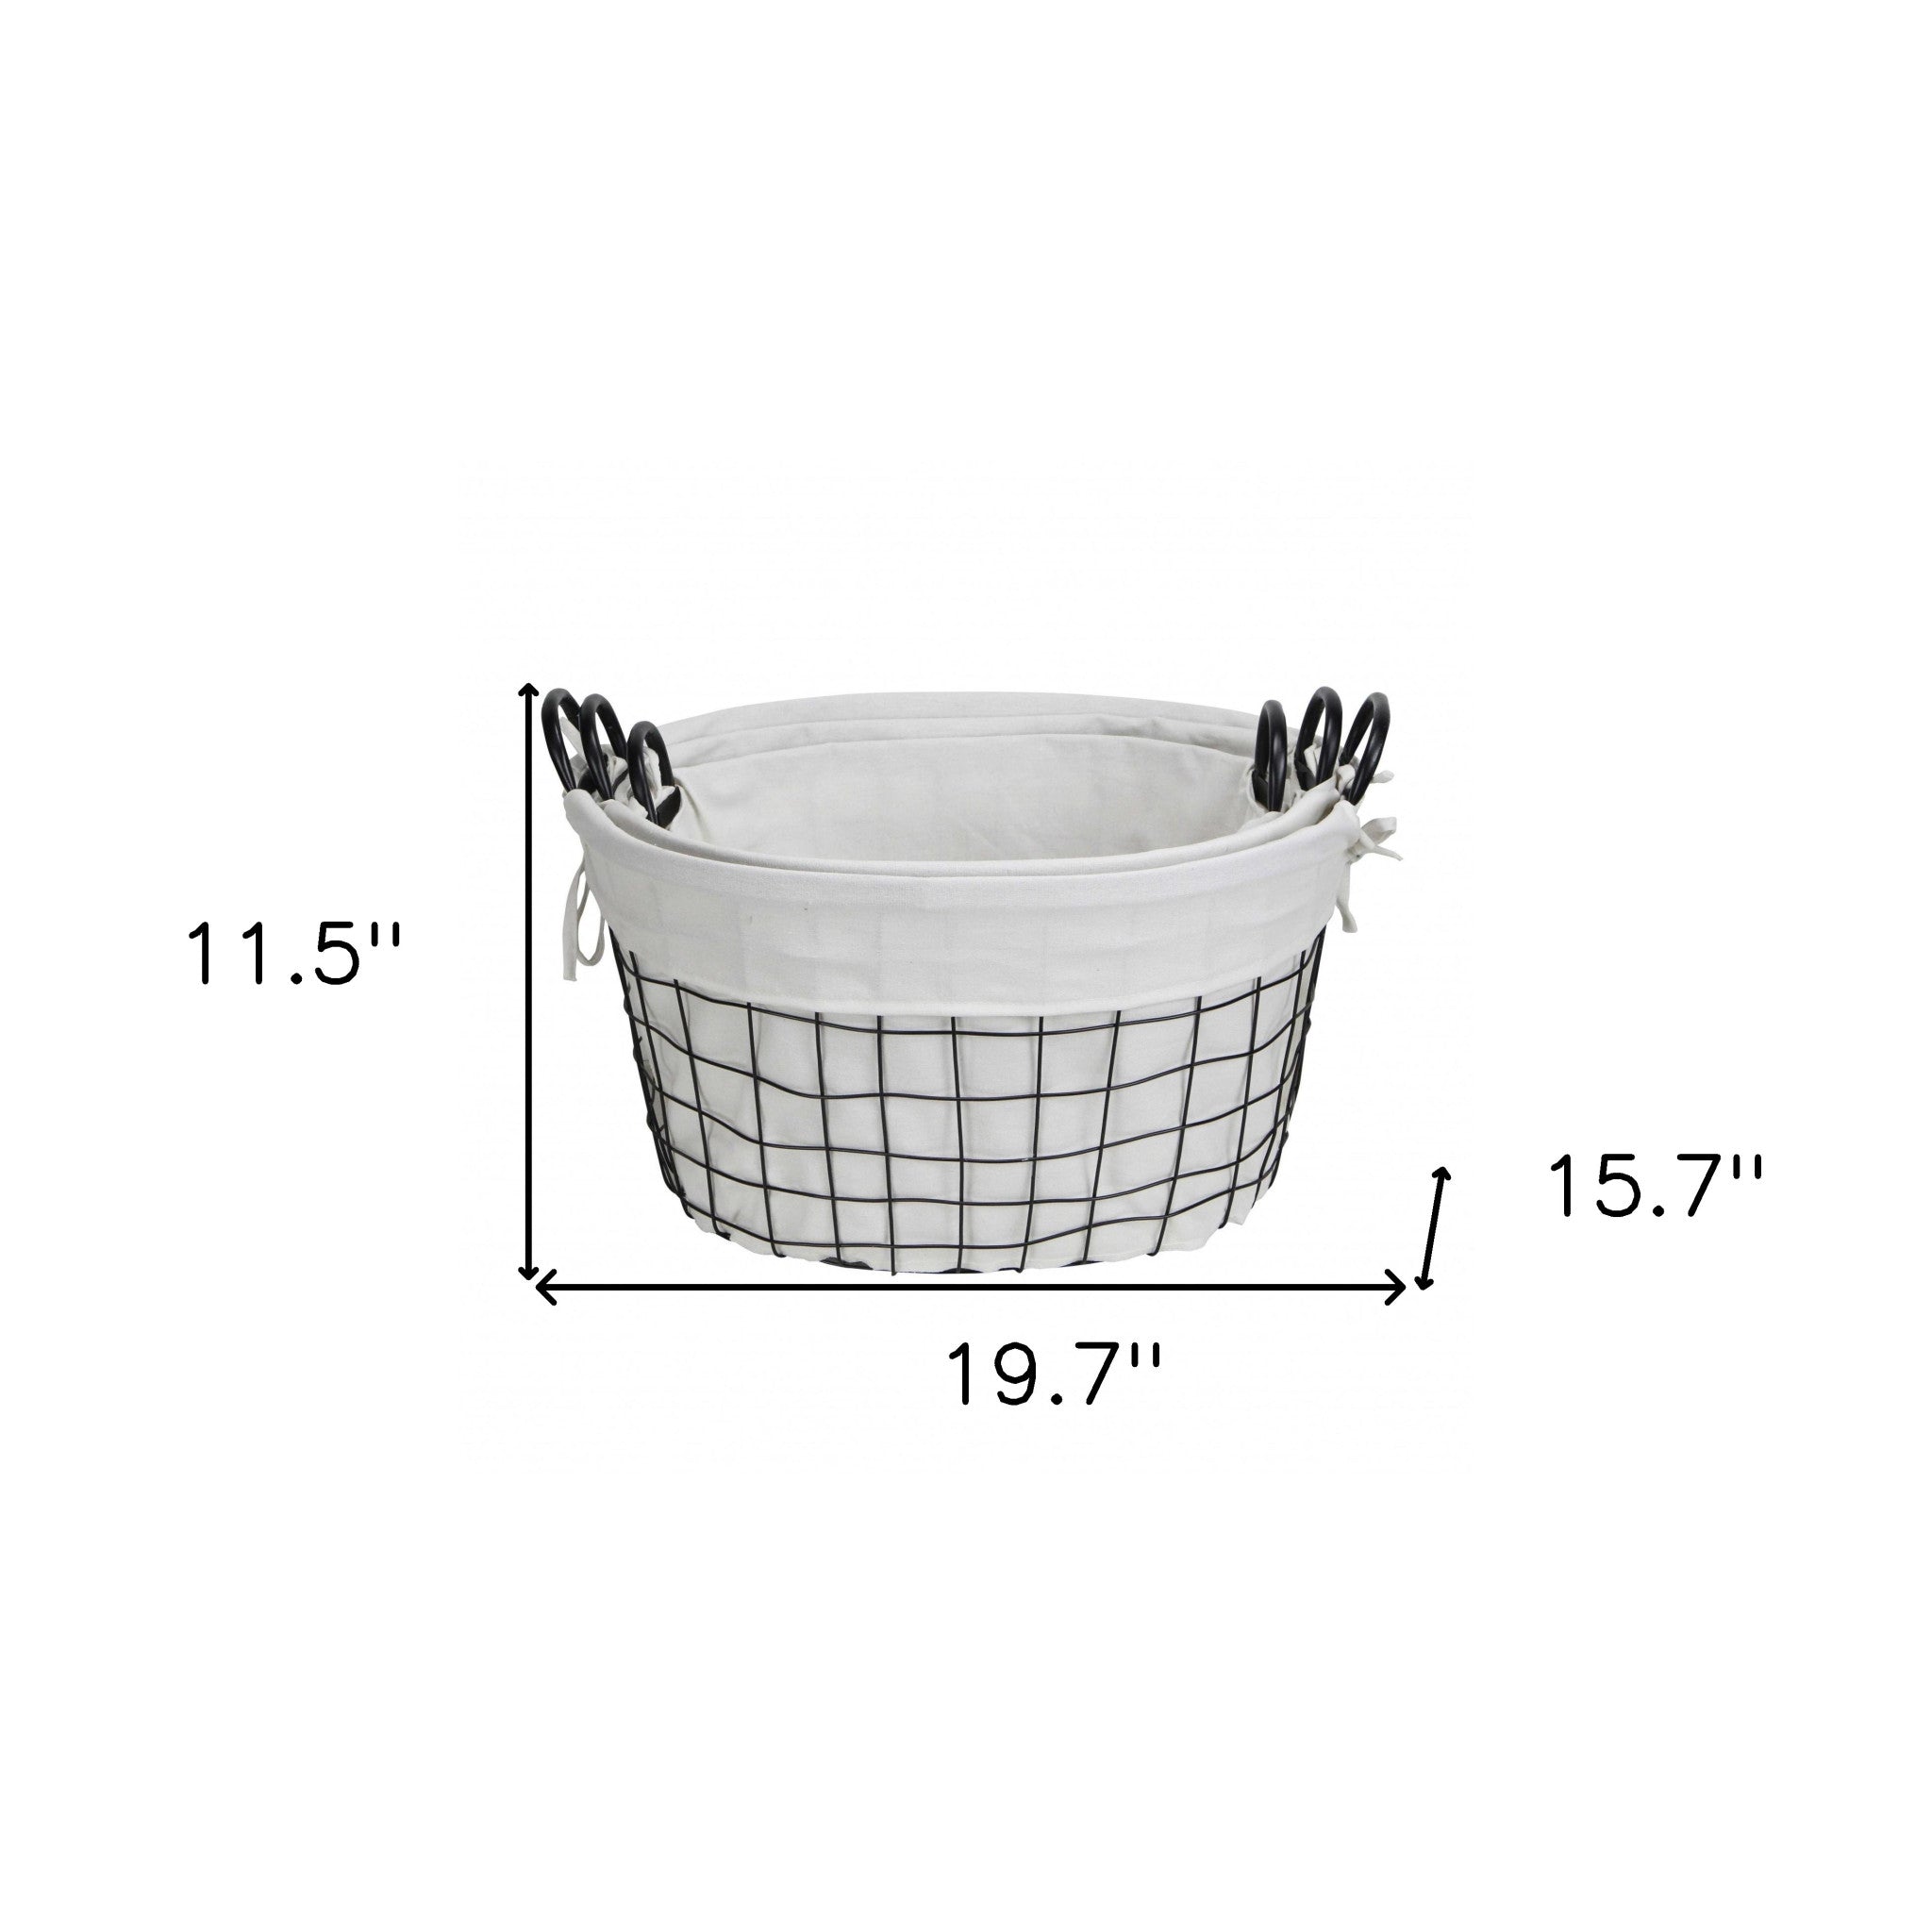 Set Of Three Black Oval Wire Baskets with White Fabric Liners and Handles